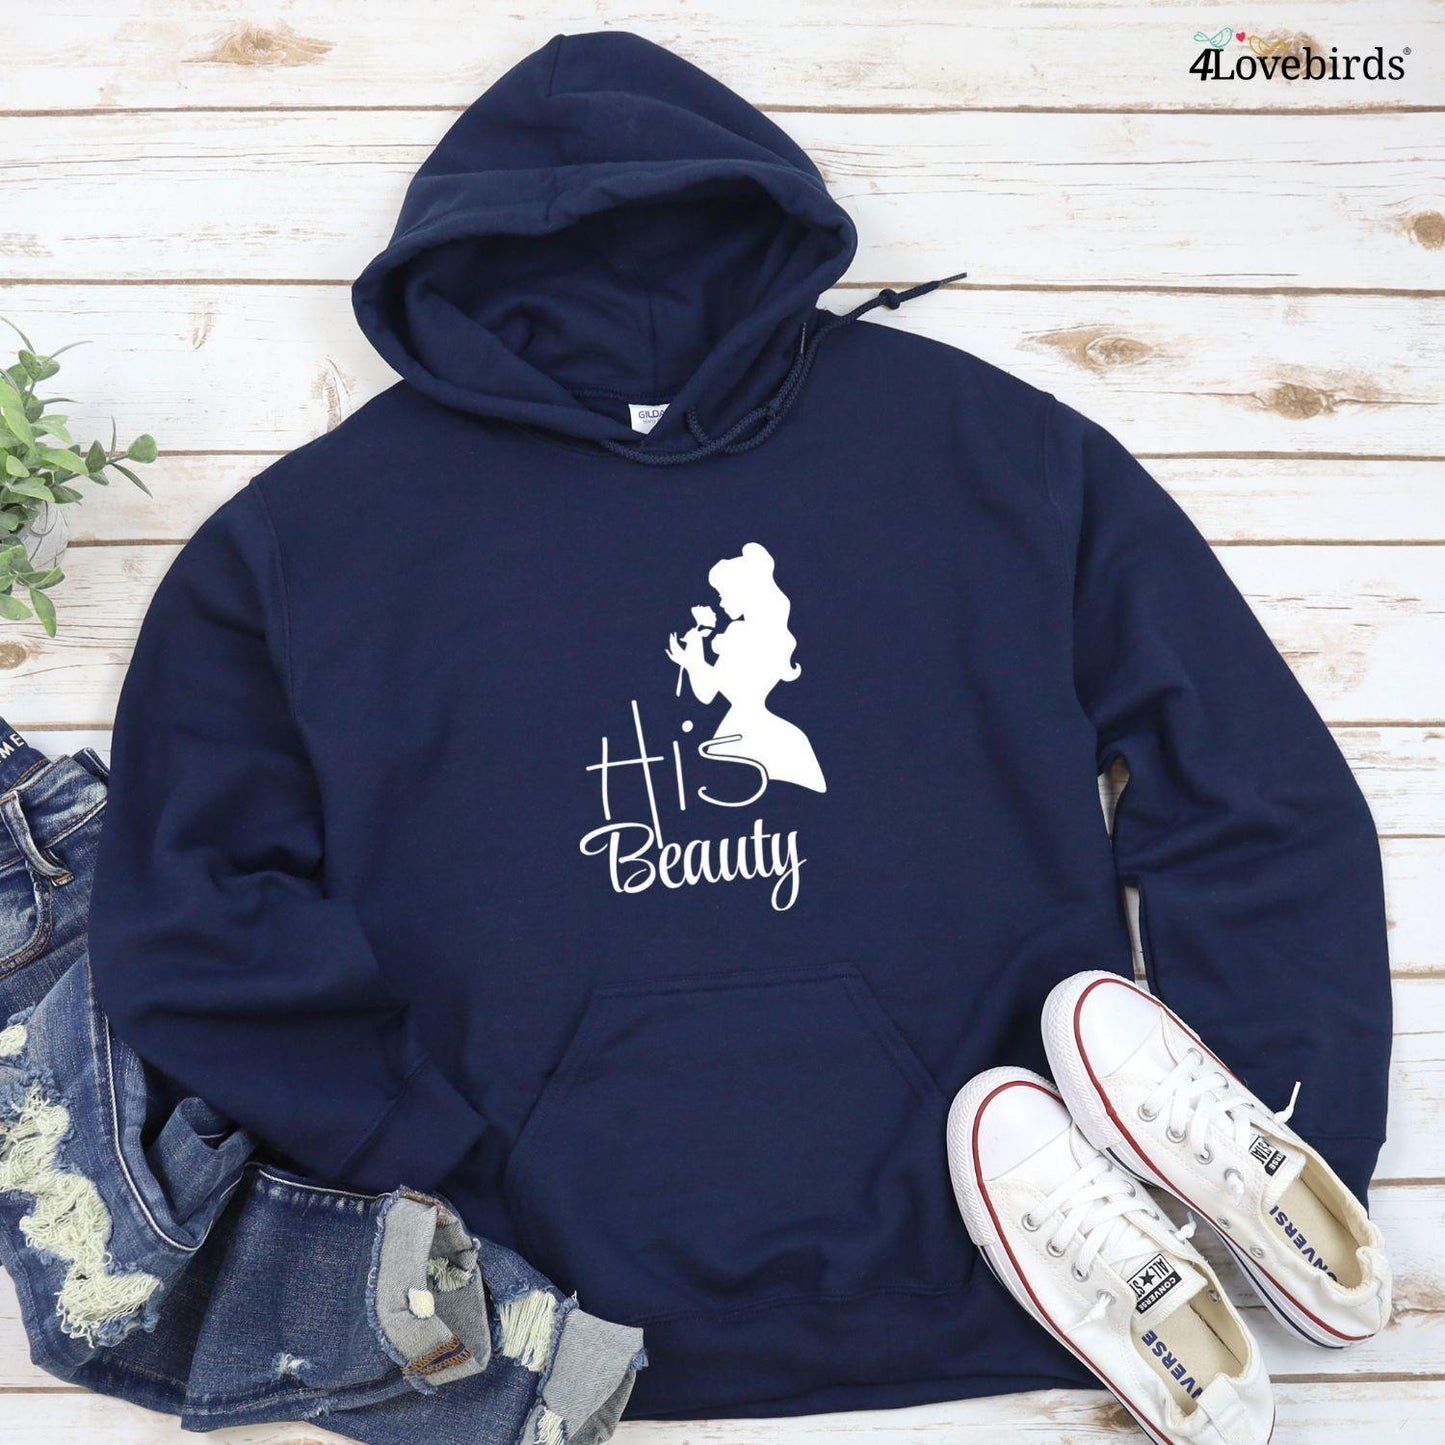 Couples' Delight: His Beauty & Her Beast Matching Outfits - Perfect Gift Idea! - 4Lovebirds